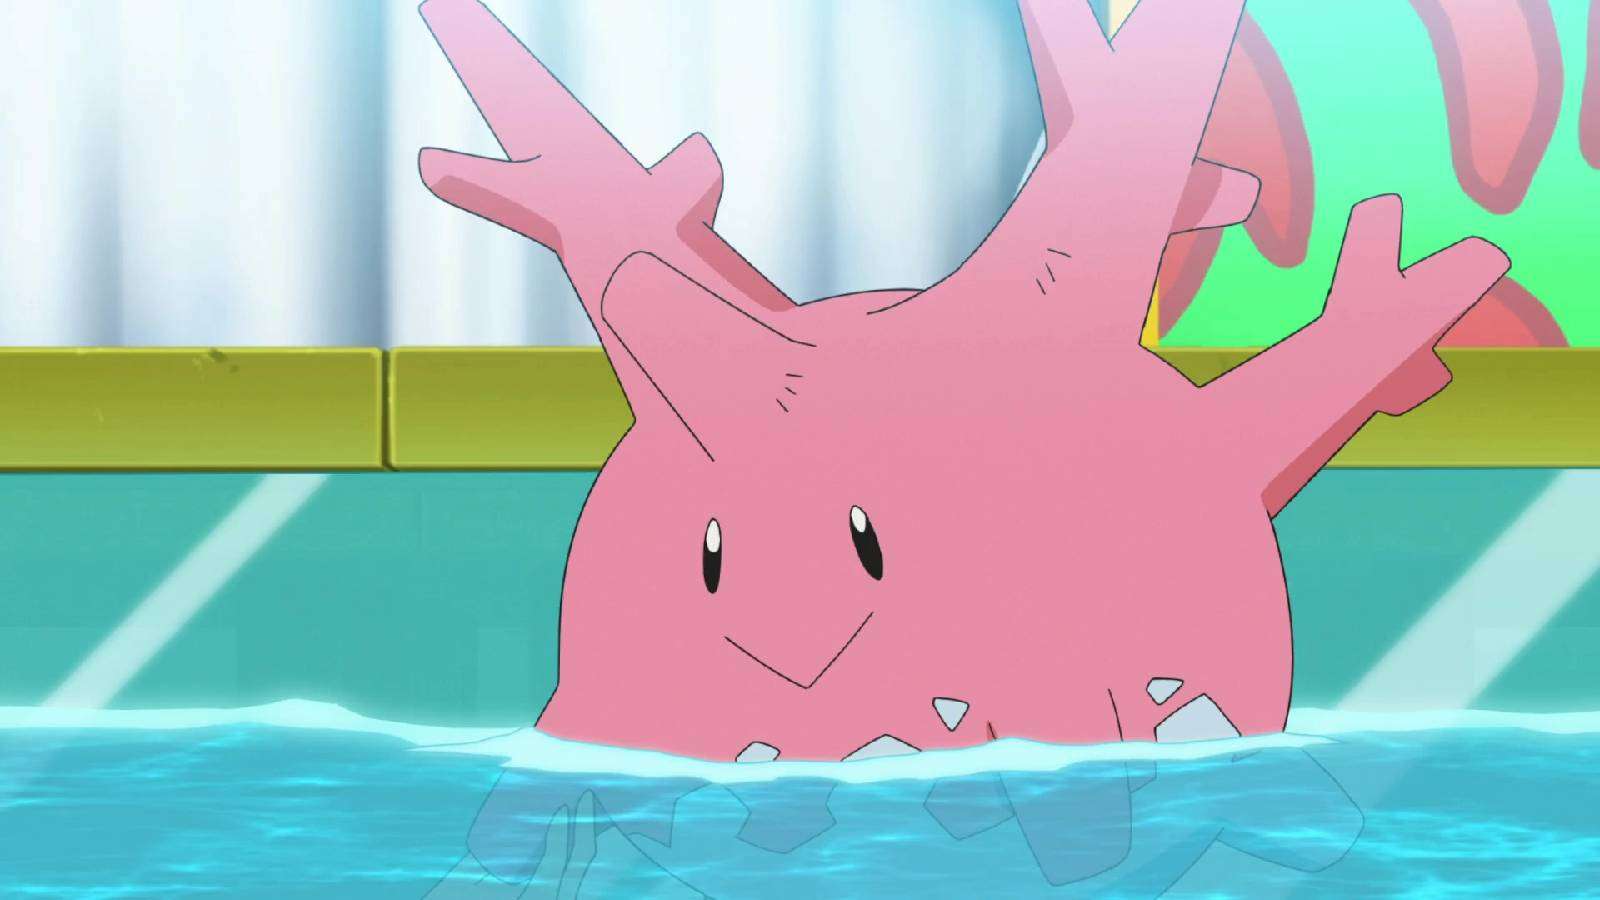 The coral Pokemon Corsola floats in water with a smile on its face